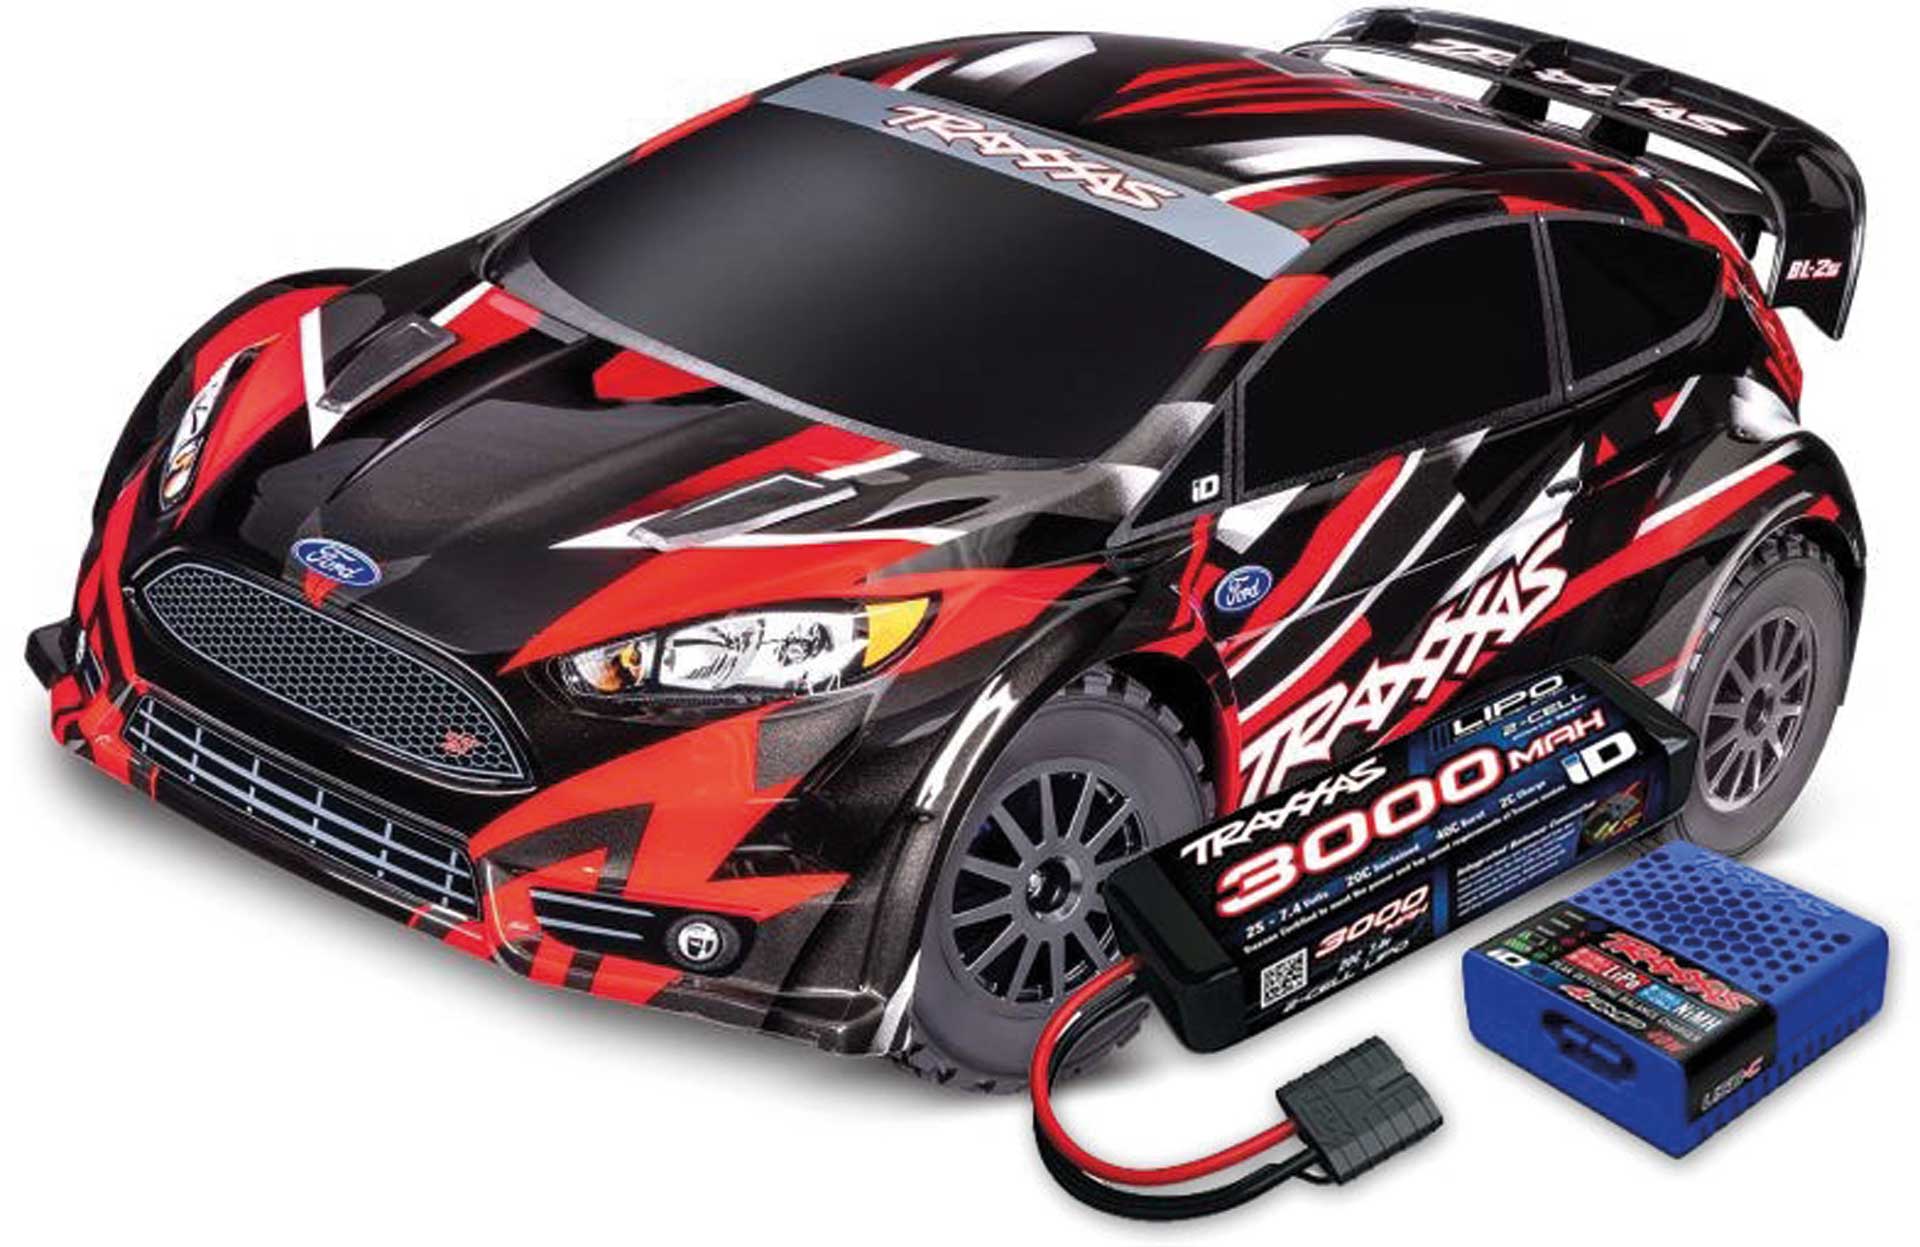 TRAXXAS FORD FIESTA ST 4X4 BL-2S RED 1/10 RALLY RTR BL-2S SET WITH FREE LIPO BATTERY AND